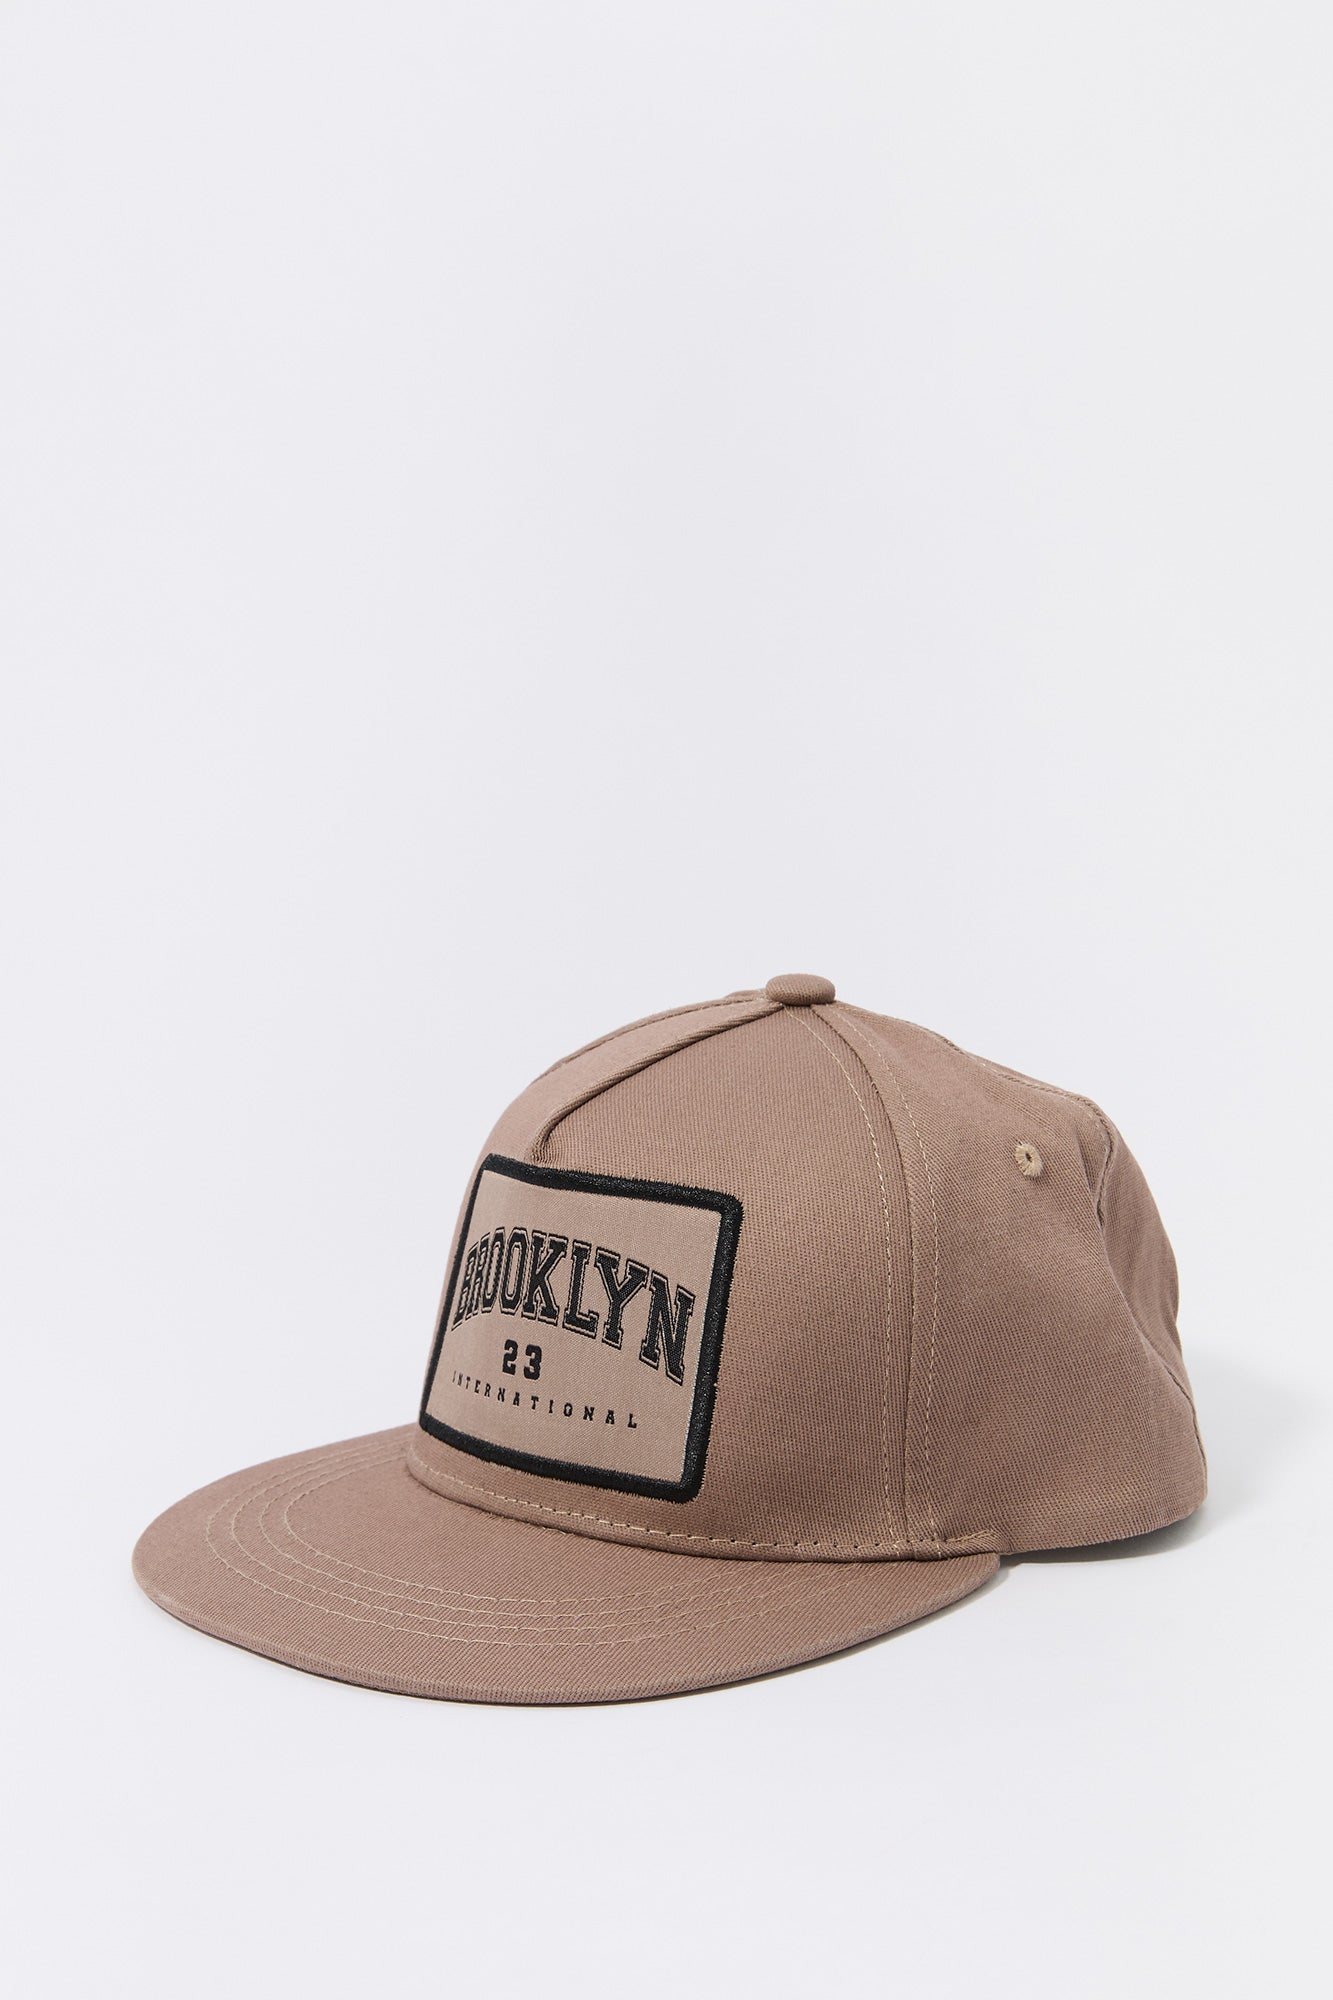 Brooklyn Embroidered Snapback Hat